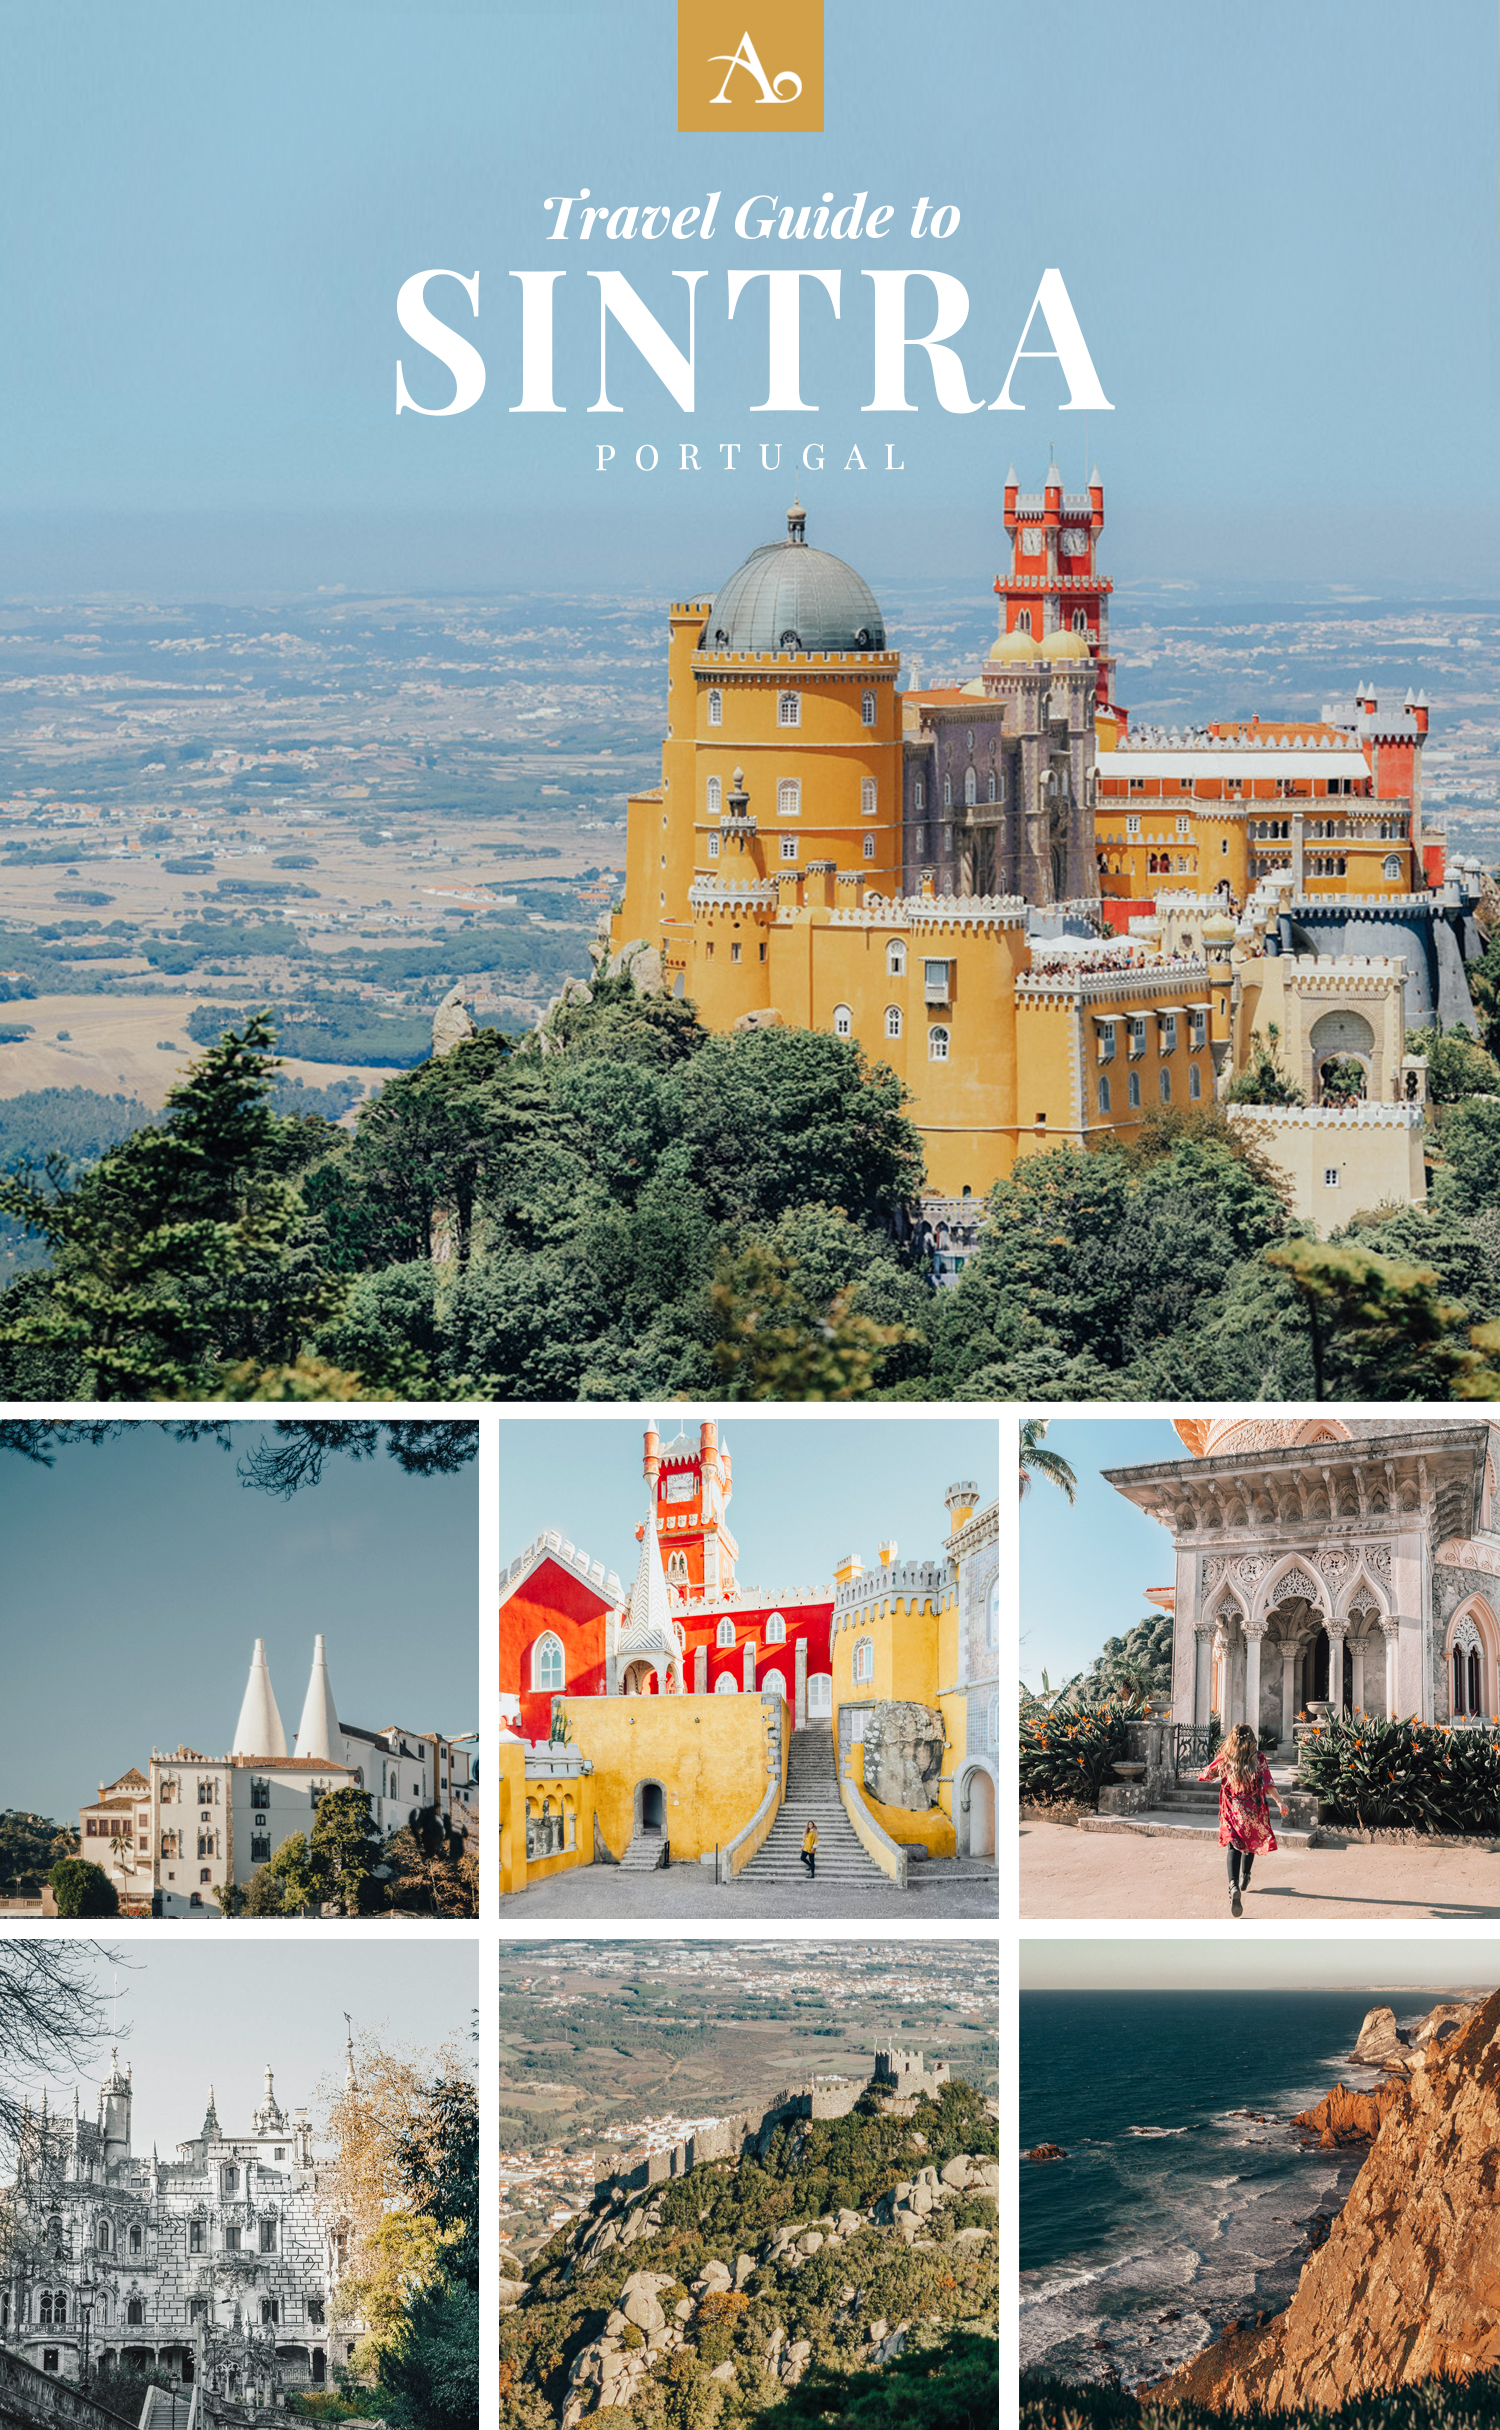 ADARAS Travel Guide to Sintra, Portugal